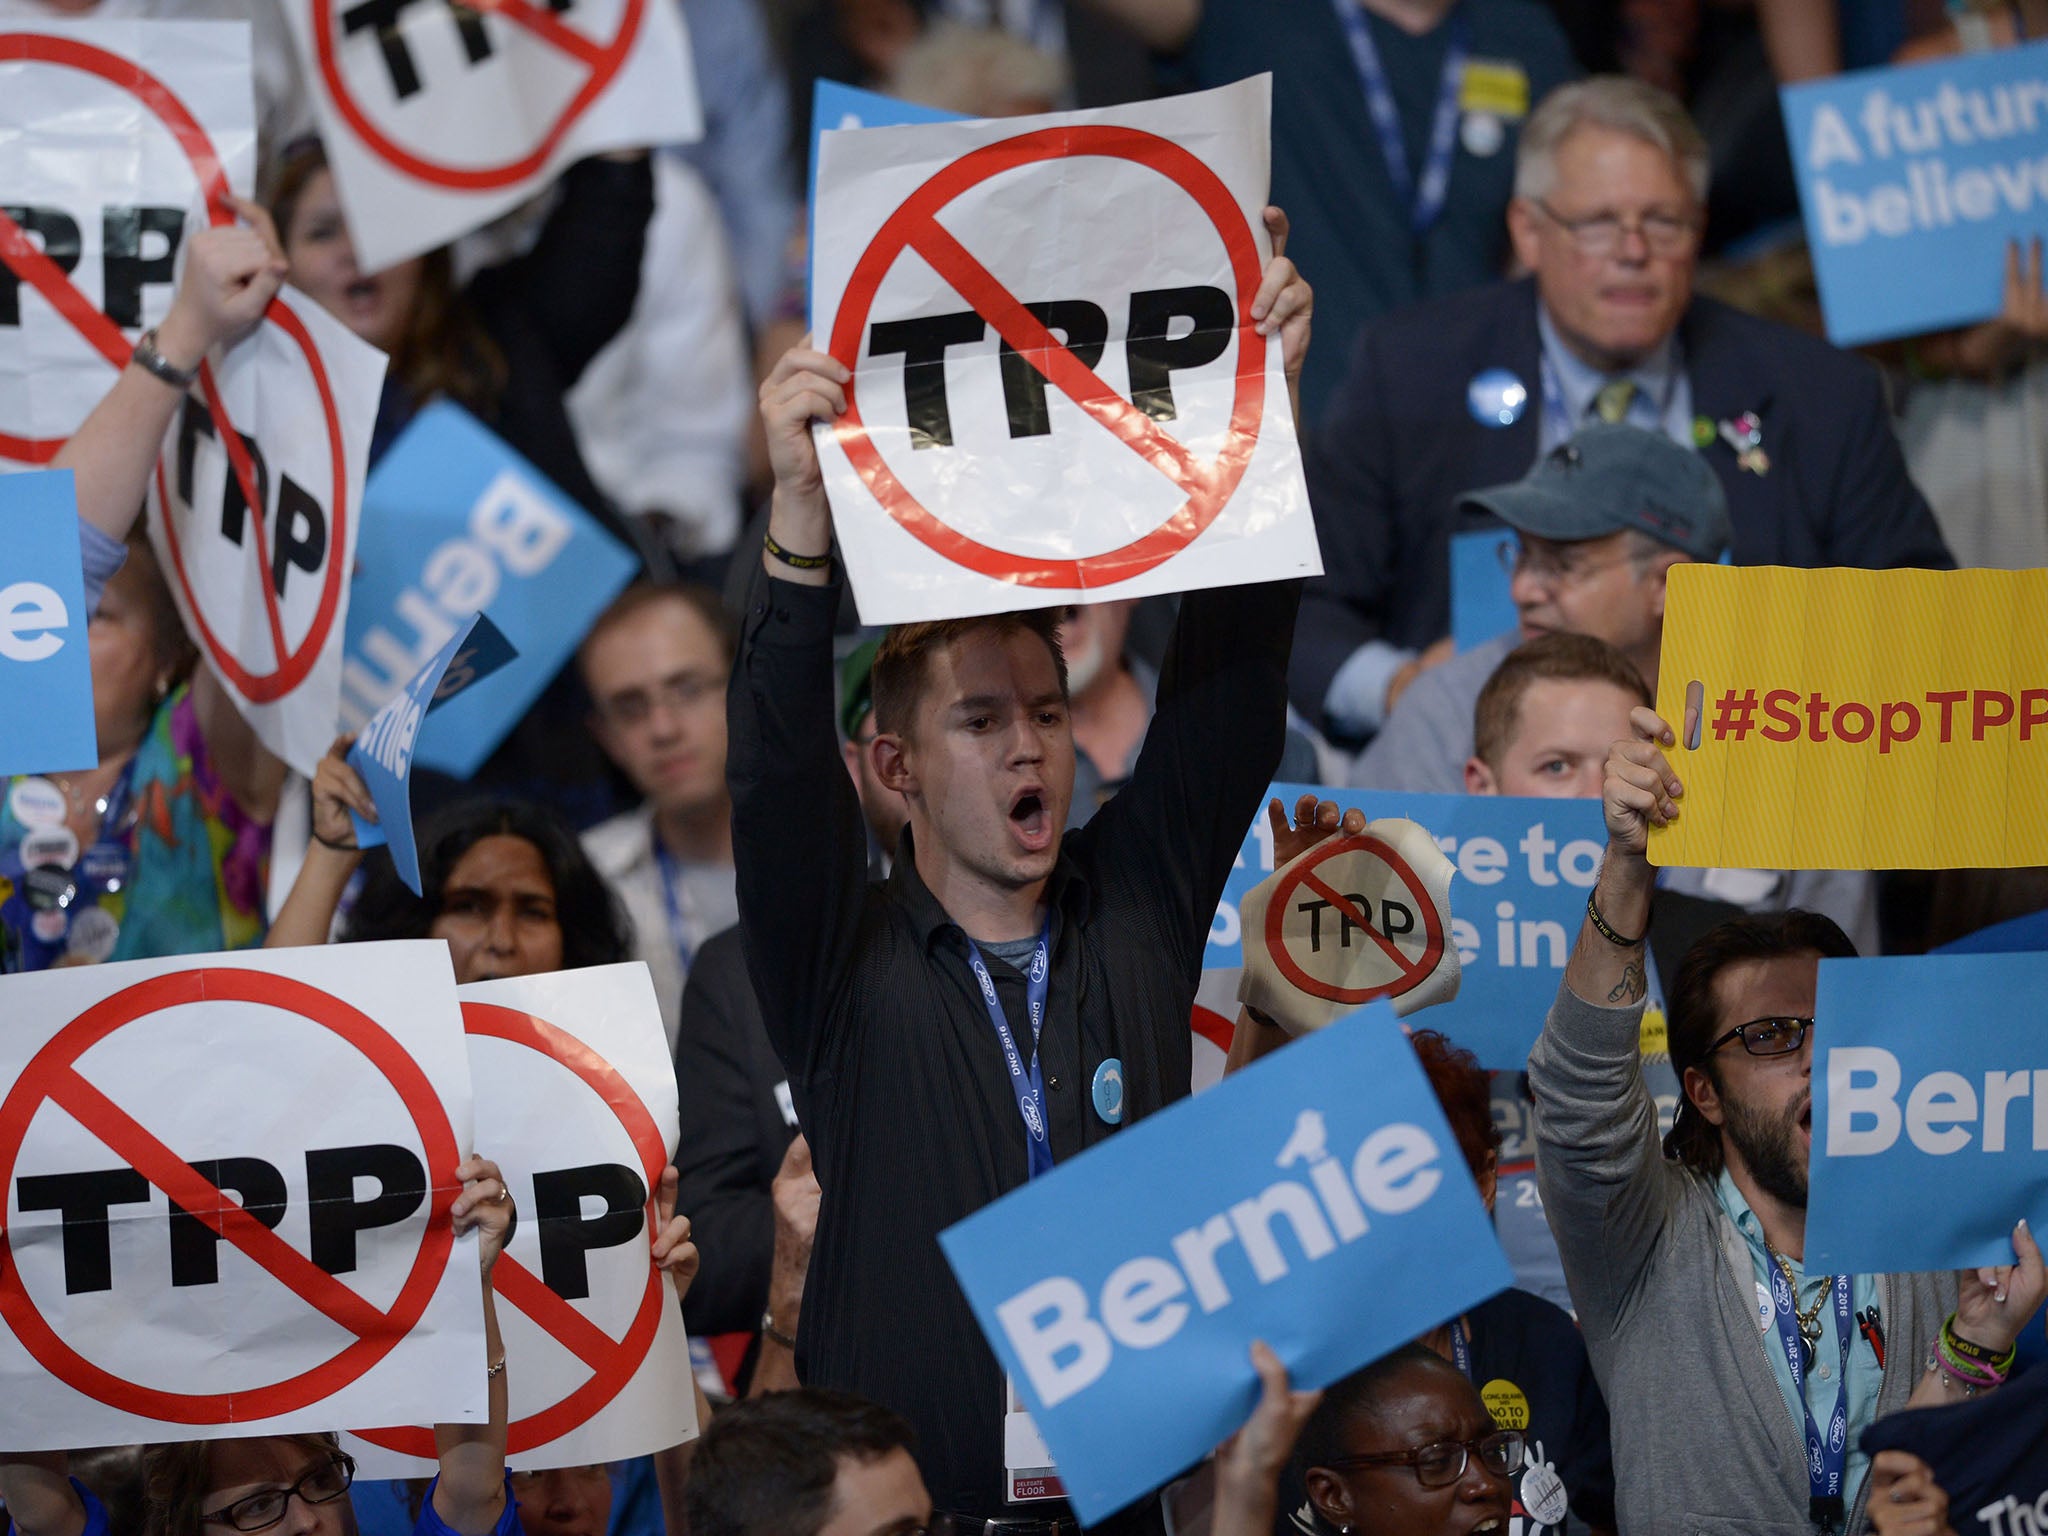 Supporters of both Donald Trump and Bernie Sanders were against the trade deal